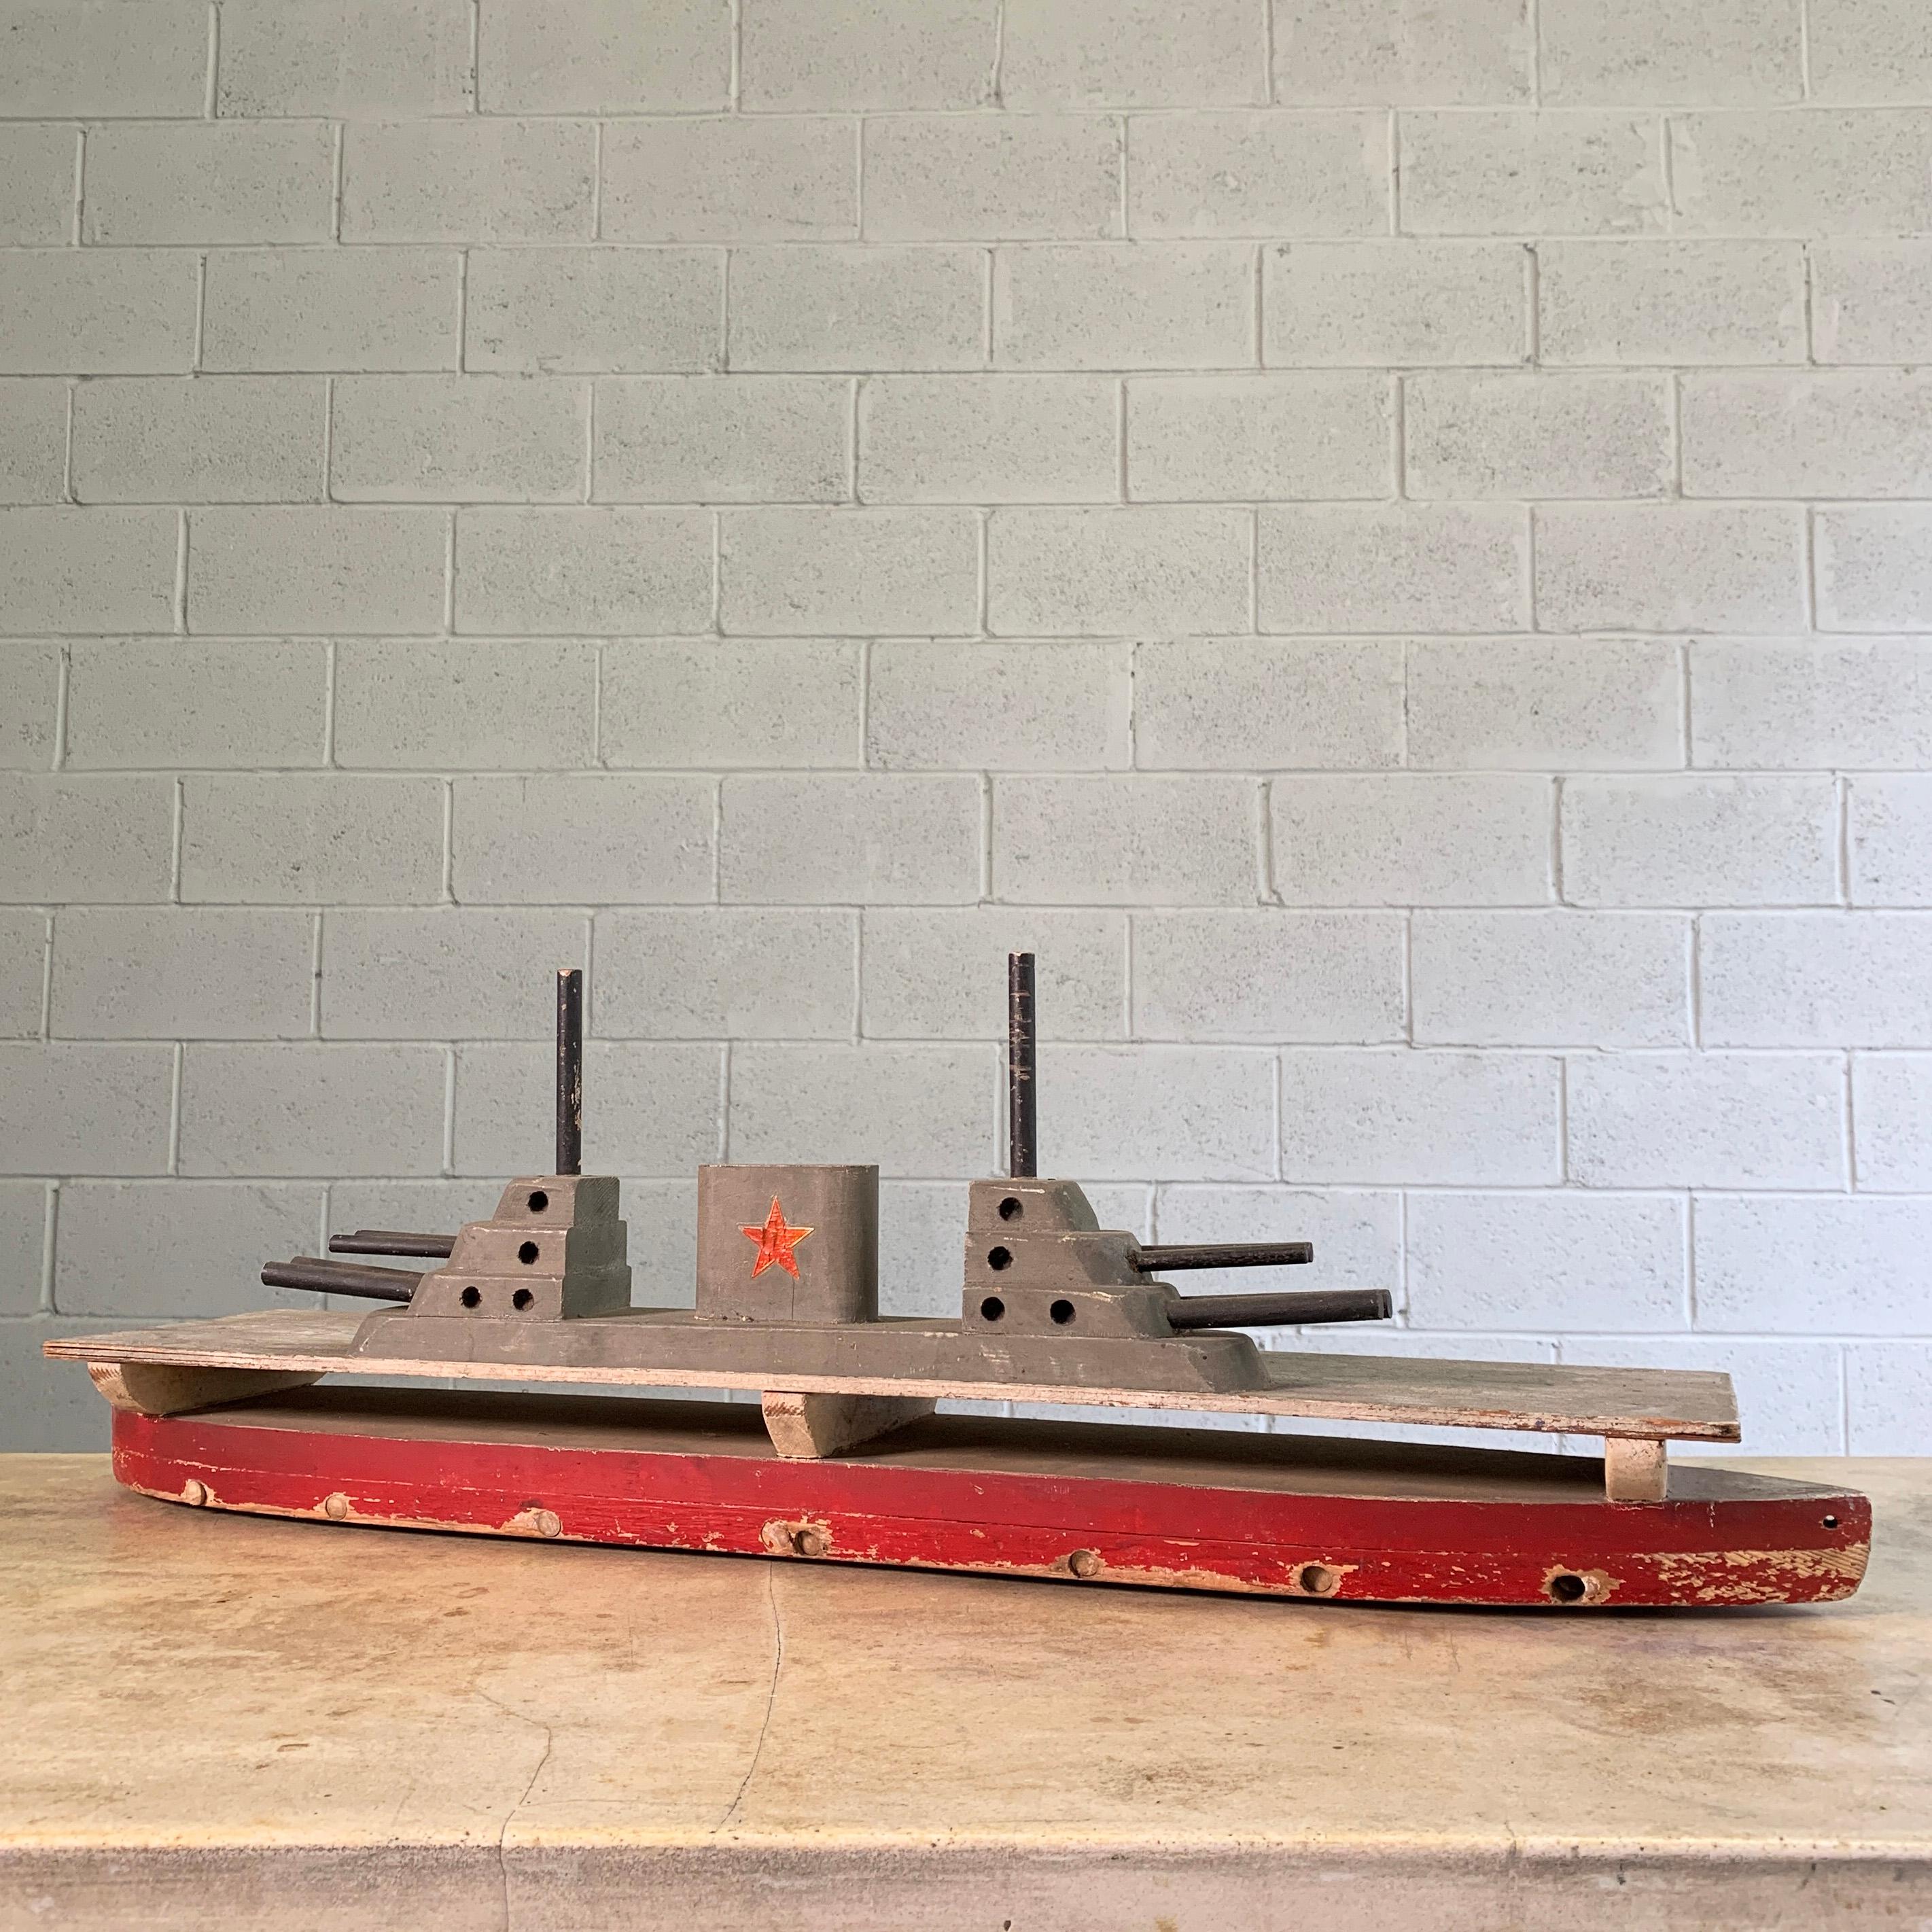 Midcentury, painted wood, aircraft carrier, nautical toy.